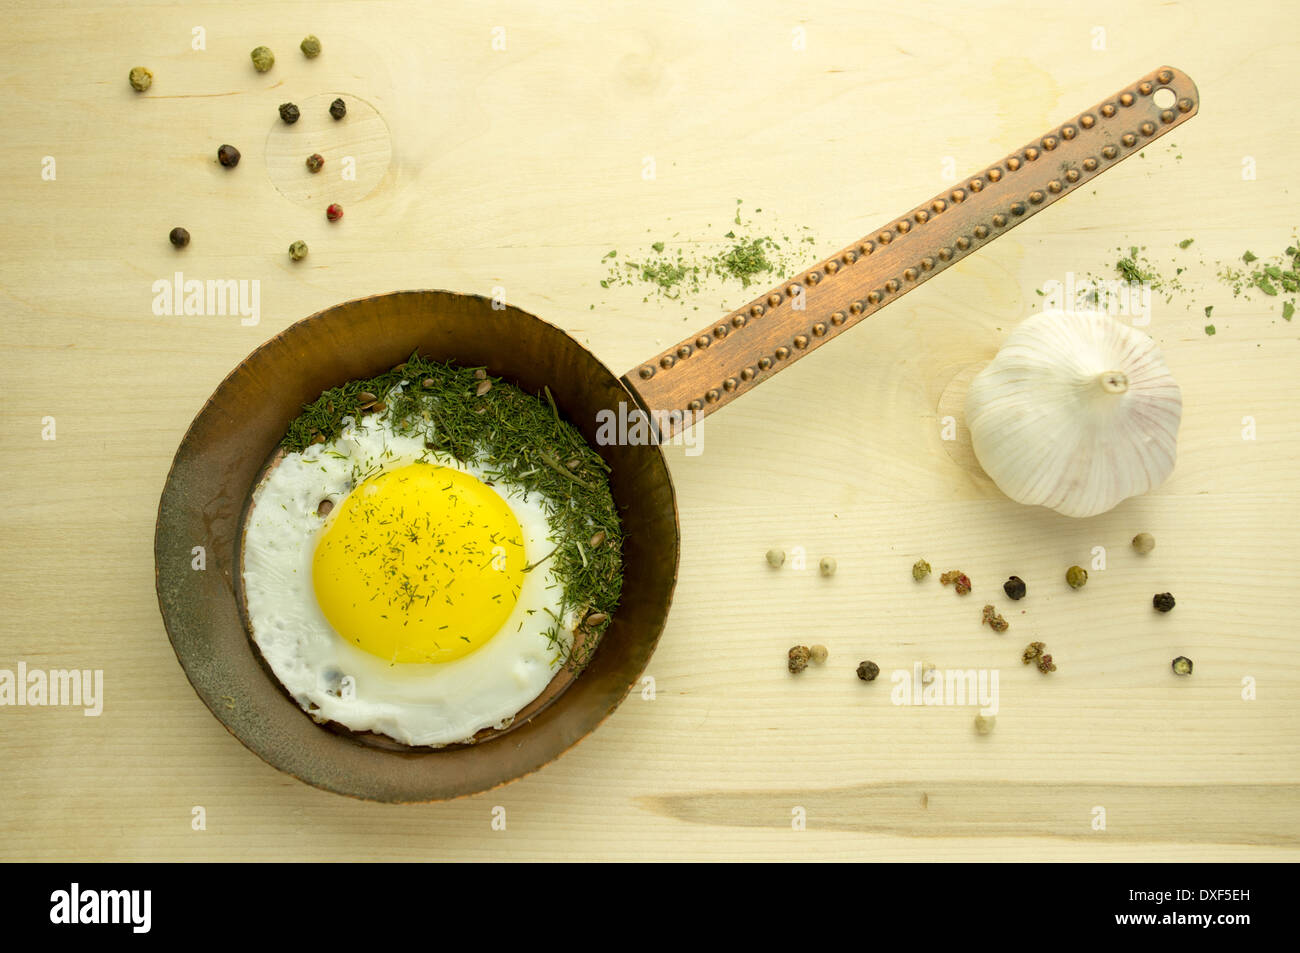 Fried egg in a copper pan on a wooden board Stock Photo